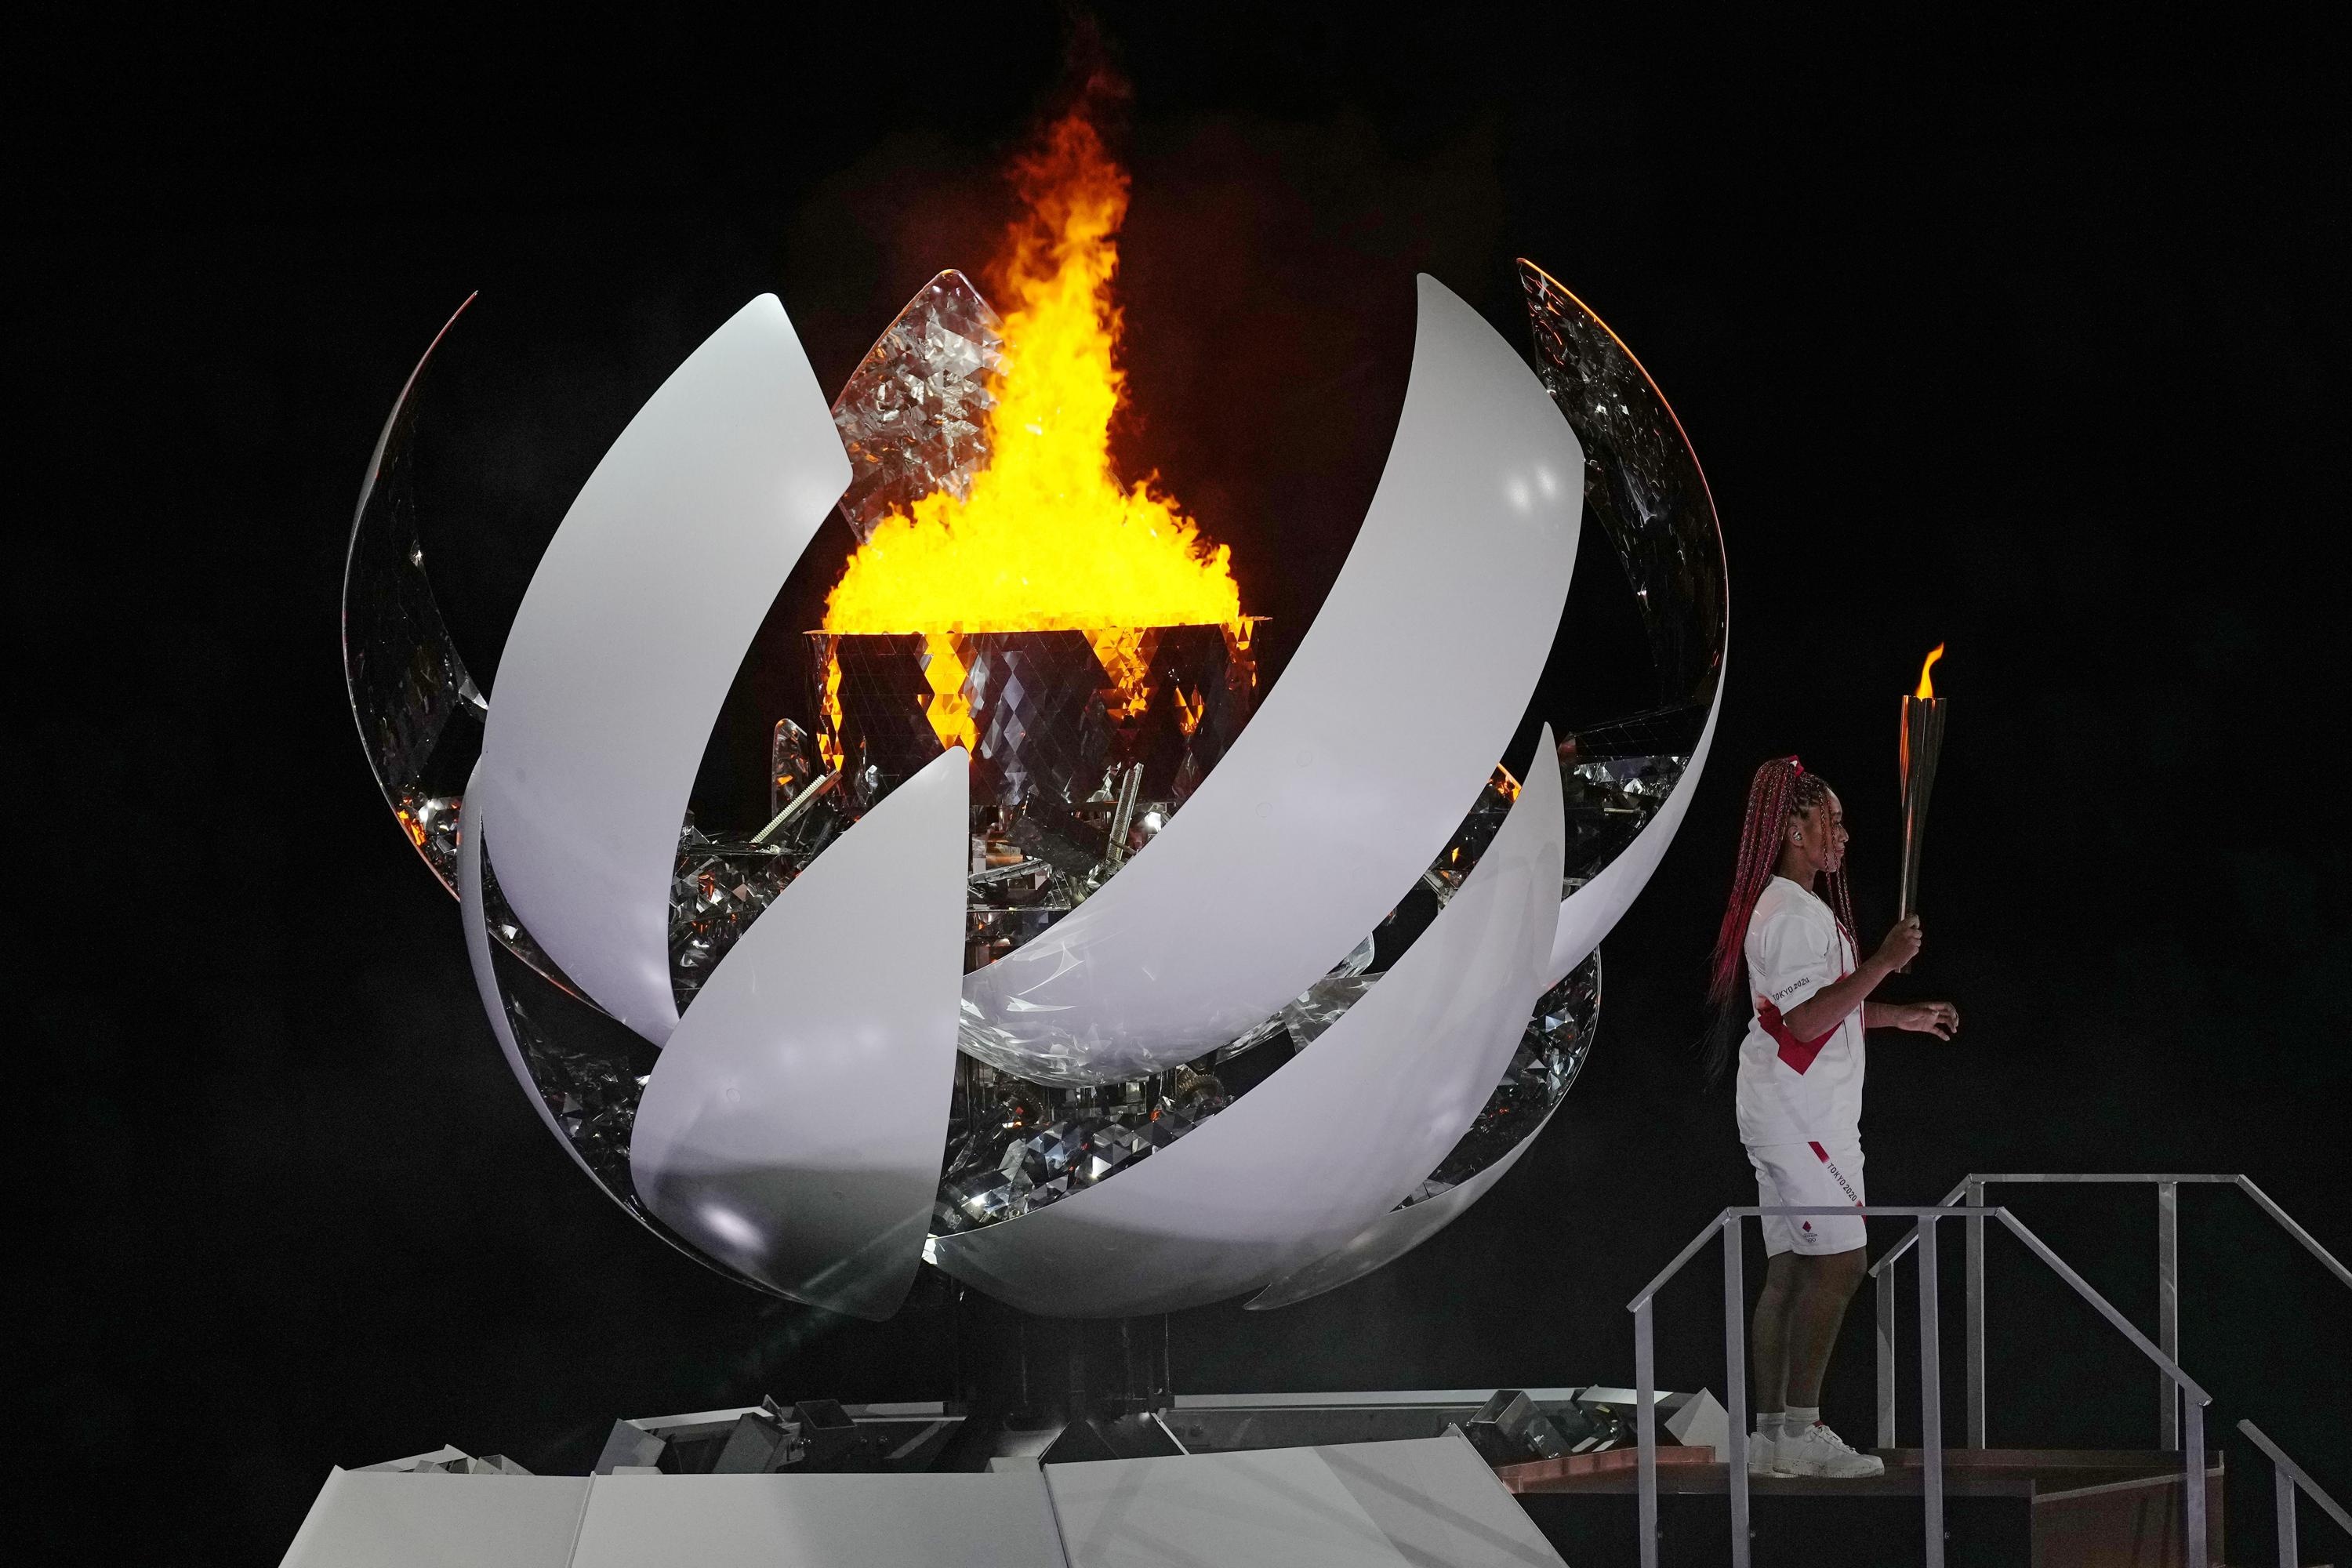 Olympic Flame: Naomi Osaka, Flame lighting during the opening ceremony, Olympic Stadium, 2020 Summer Olympics, Japan. 3000x2000 HD Wallpaper.